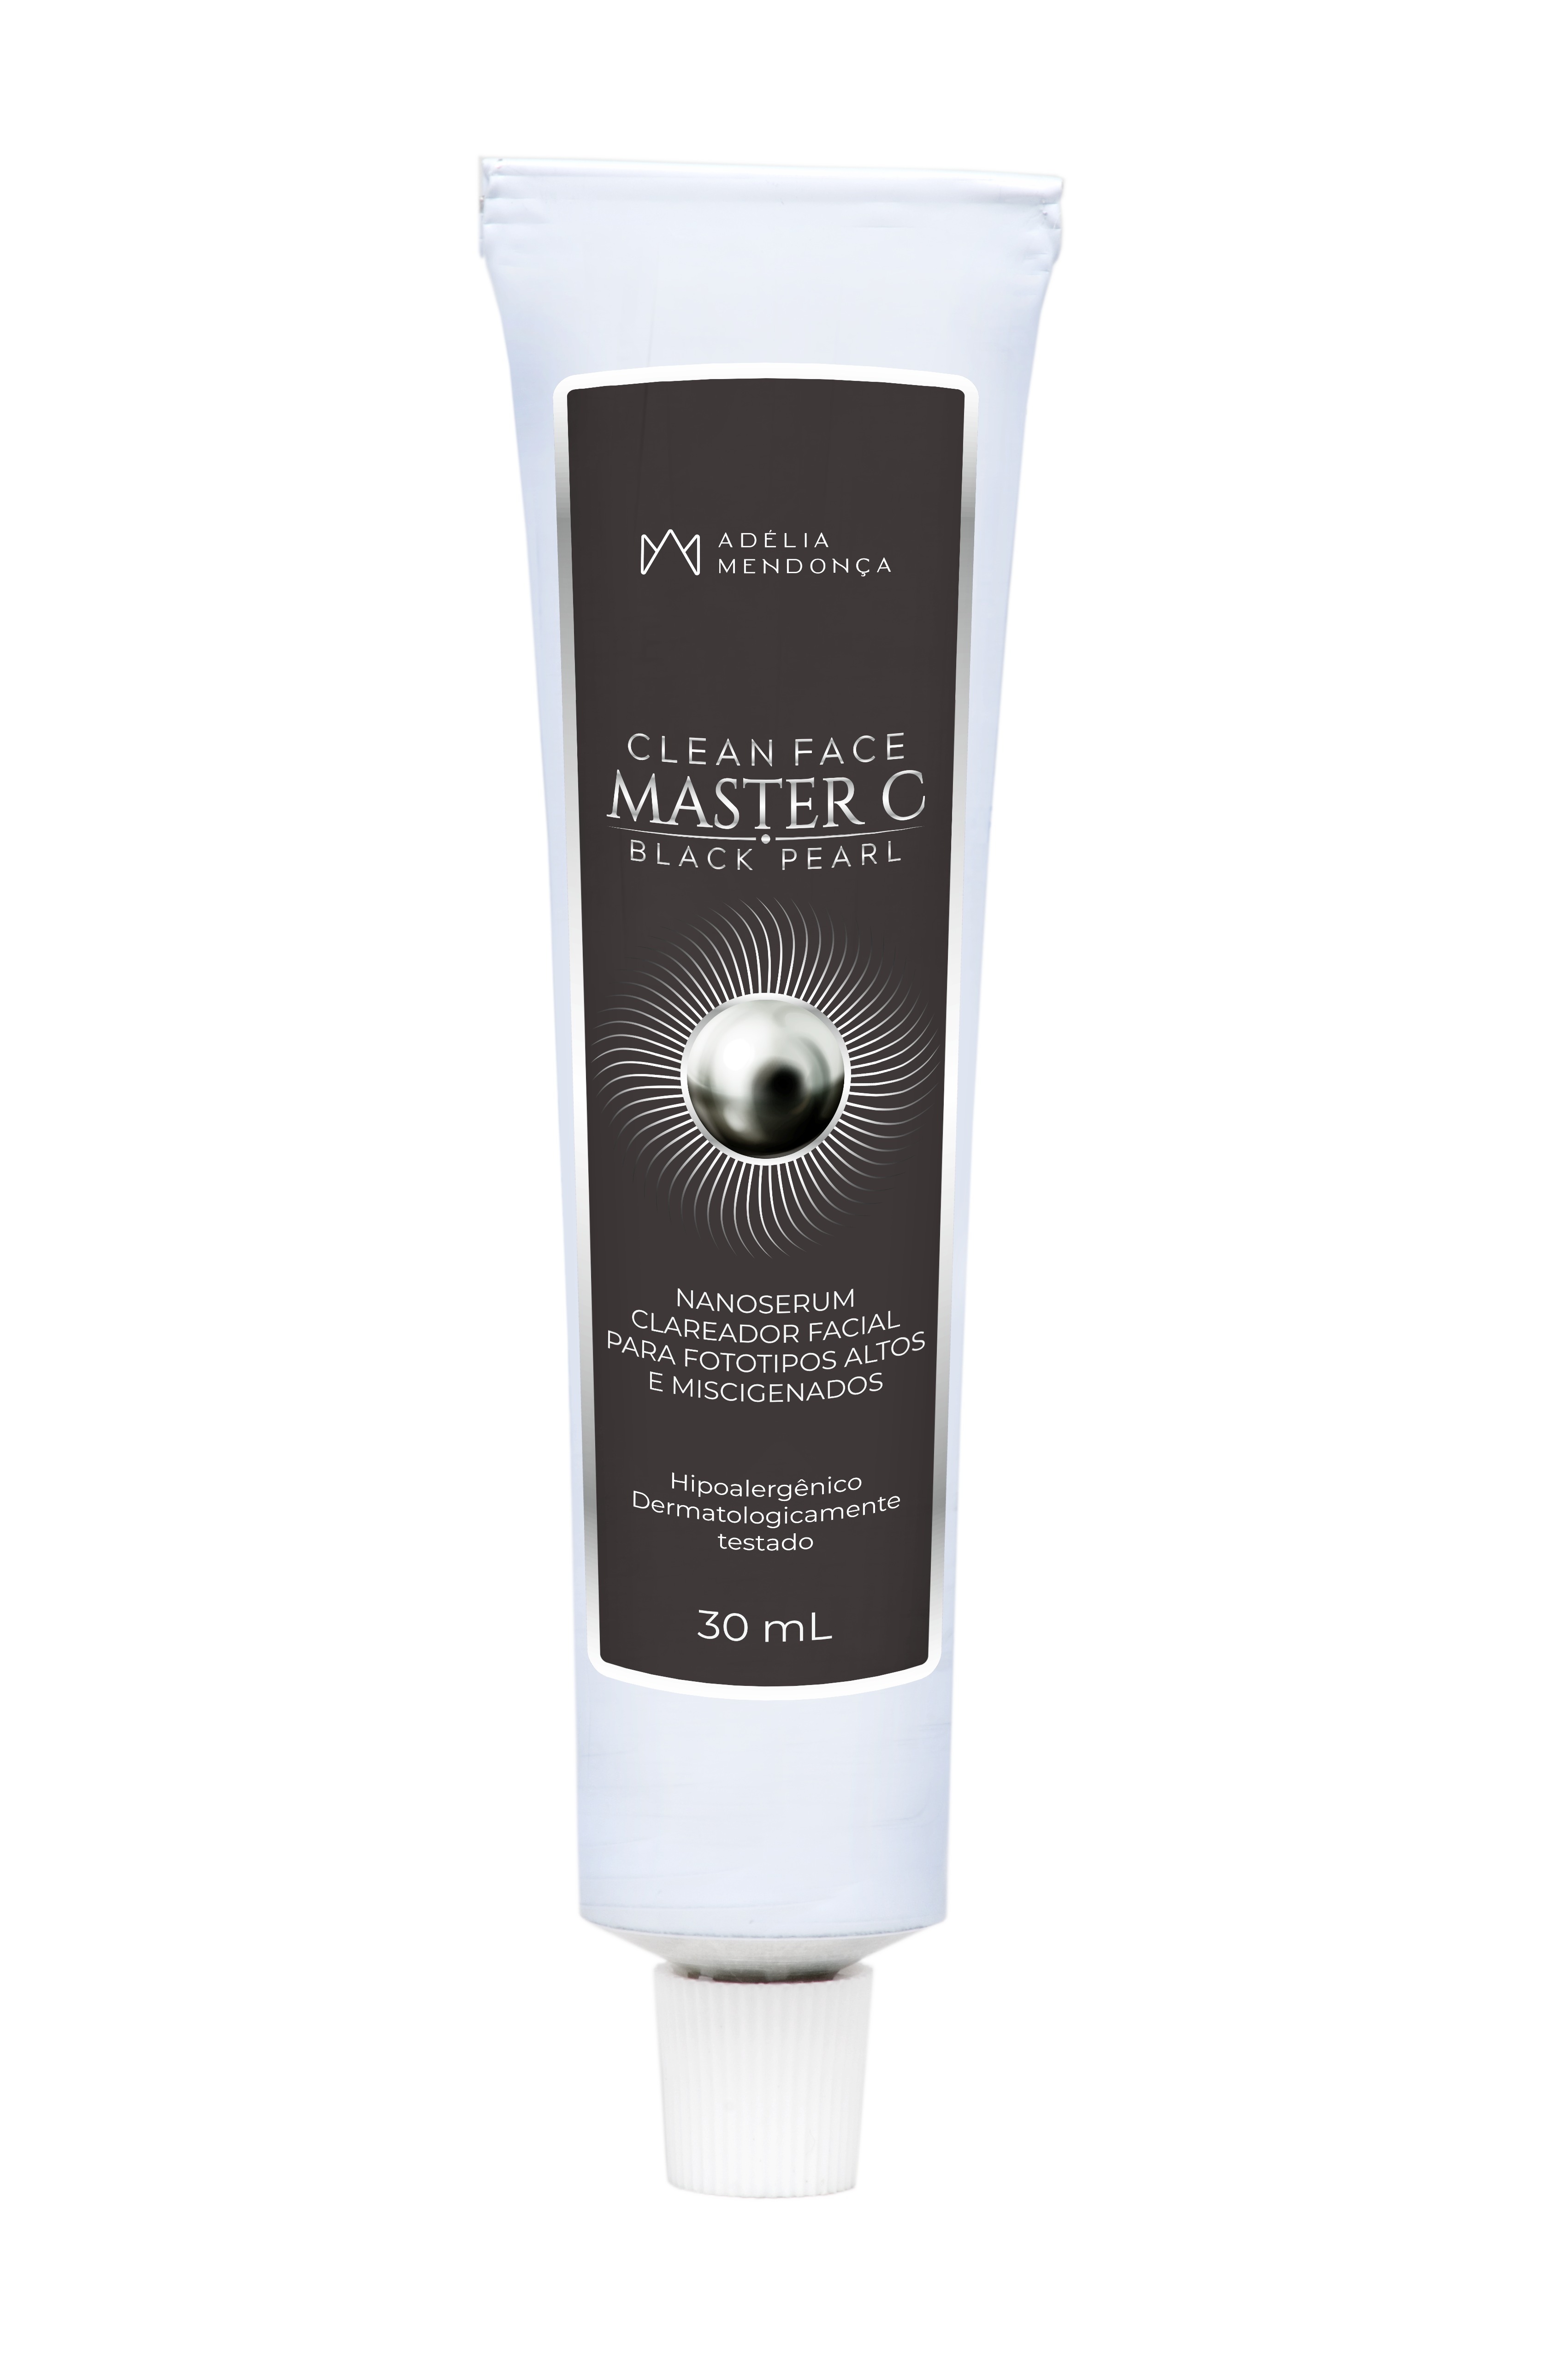 Clean Face Master C Black Pearl